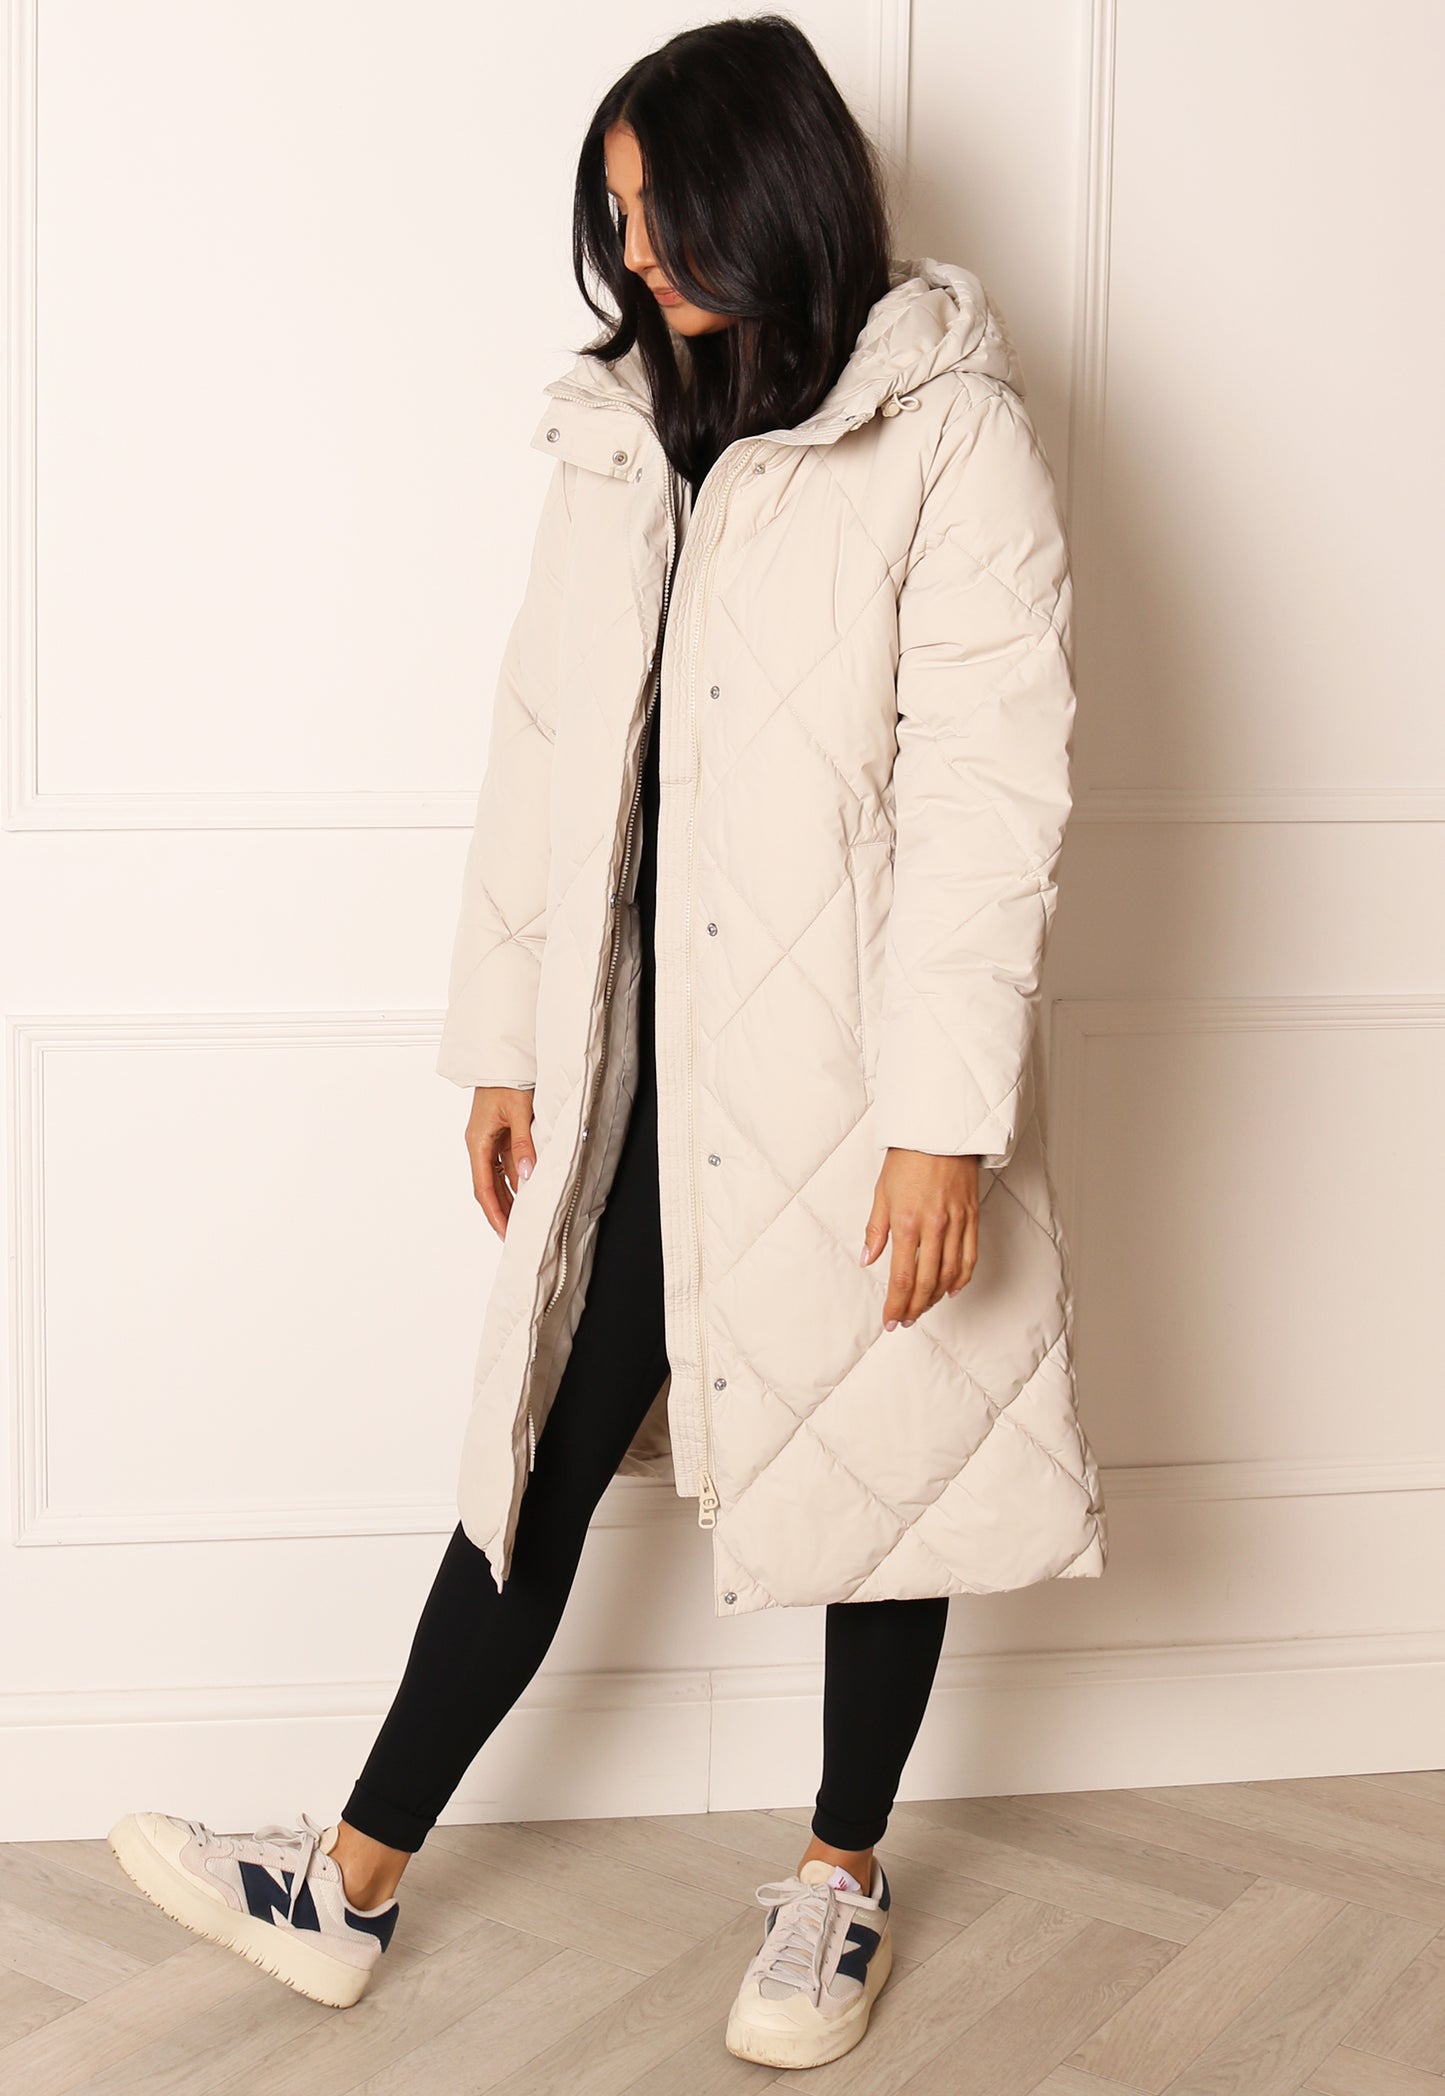 VERO MODA Laloa Diamond Quilted Midi Puffer Coat with Hood in Cream - One Nation Clothing